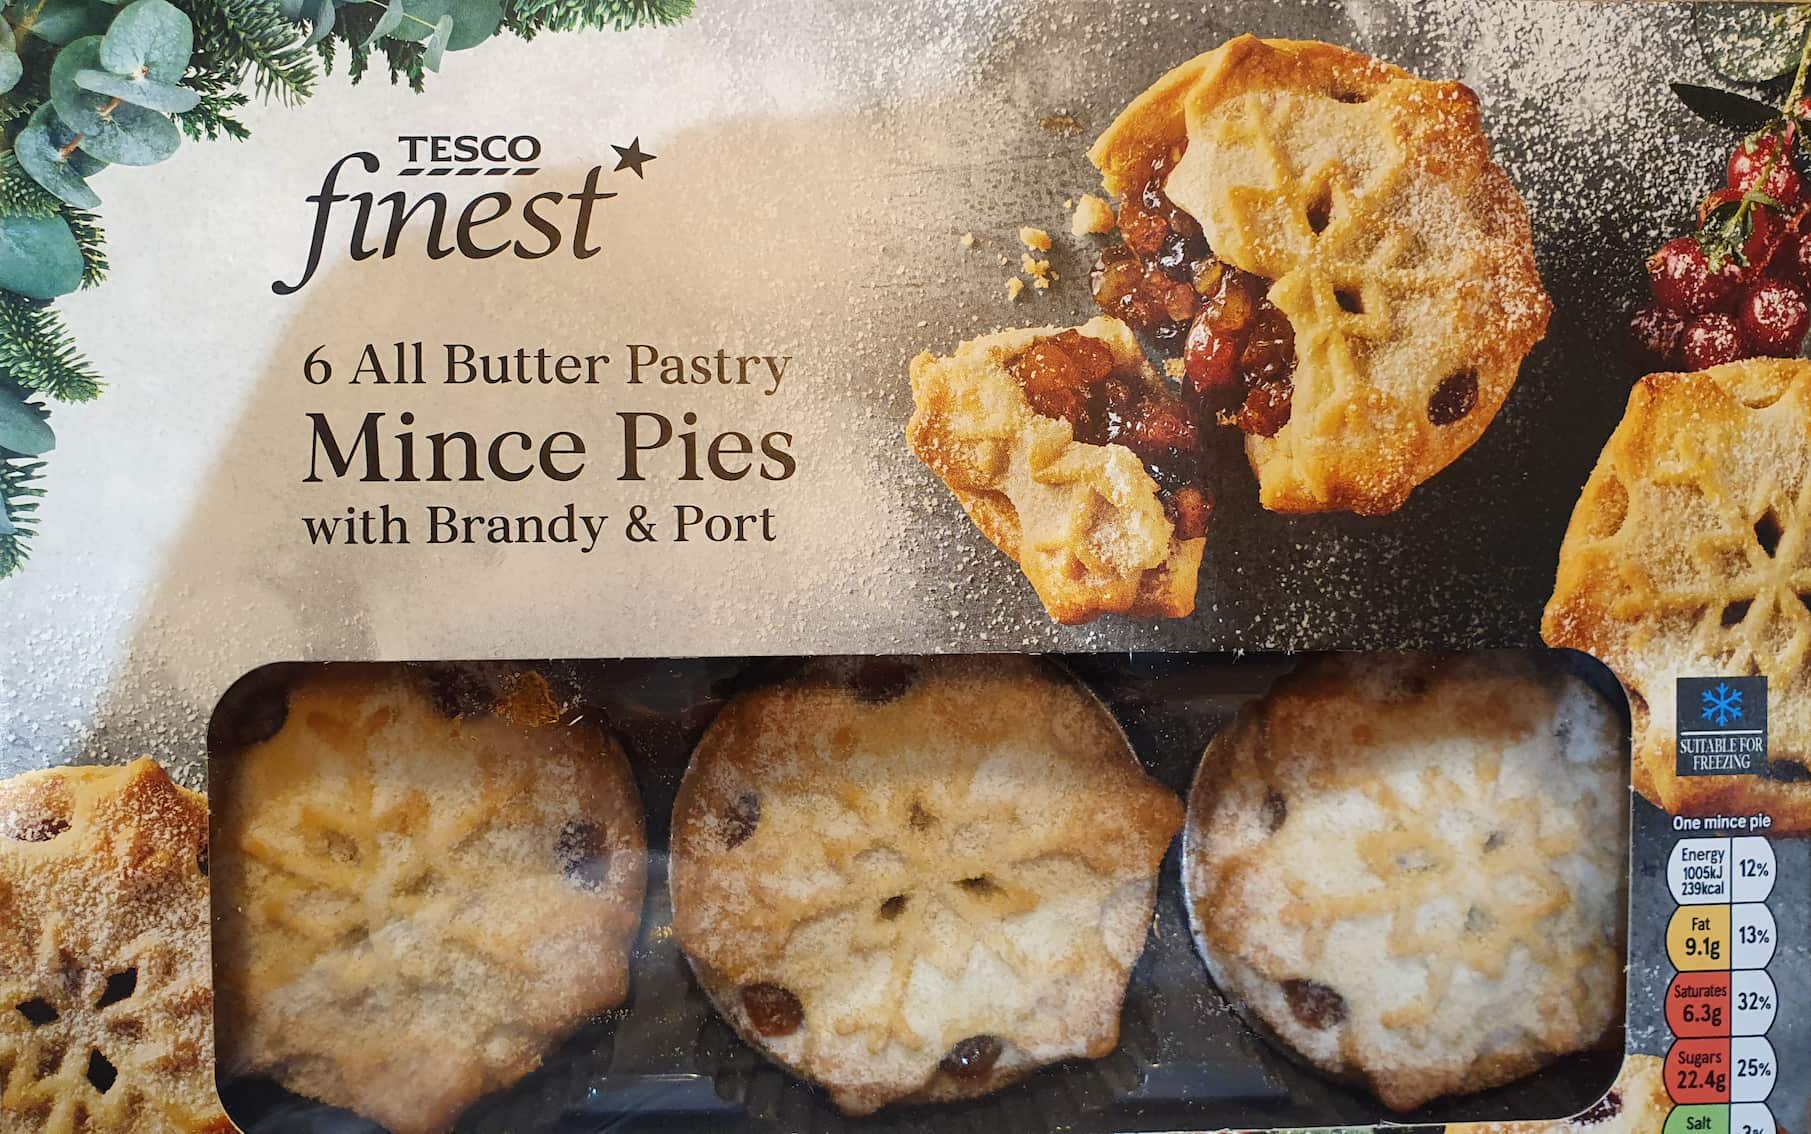 Tesco Finest All Butter Pastry Mince Pie Review 2021